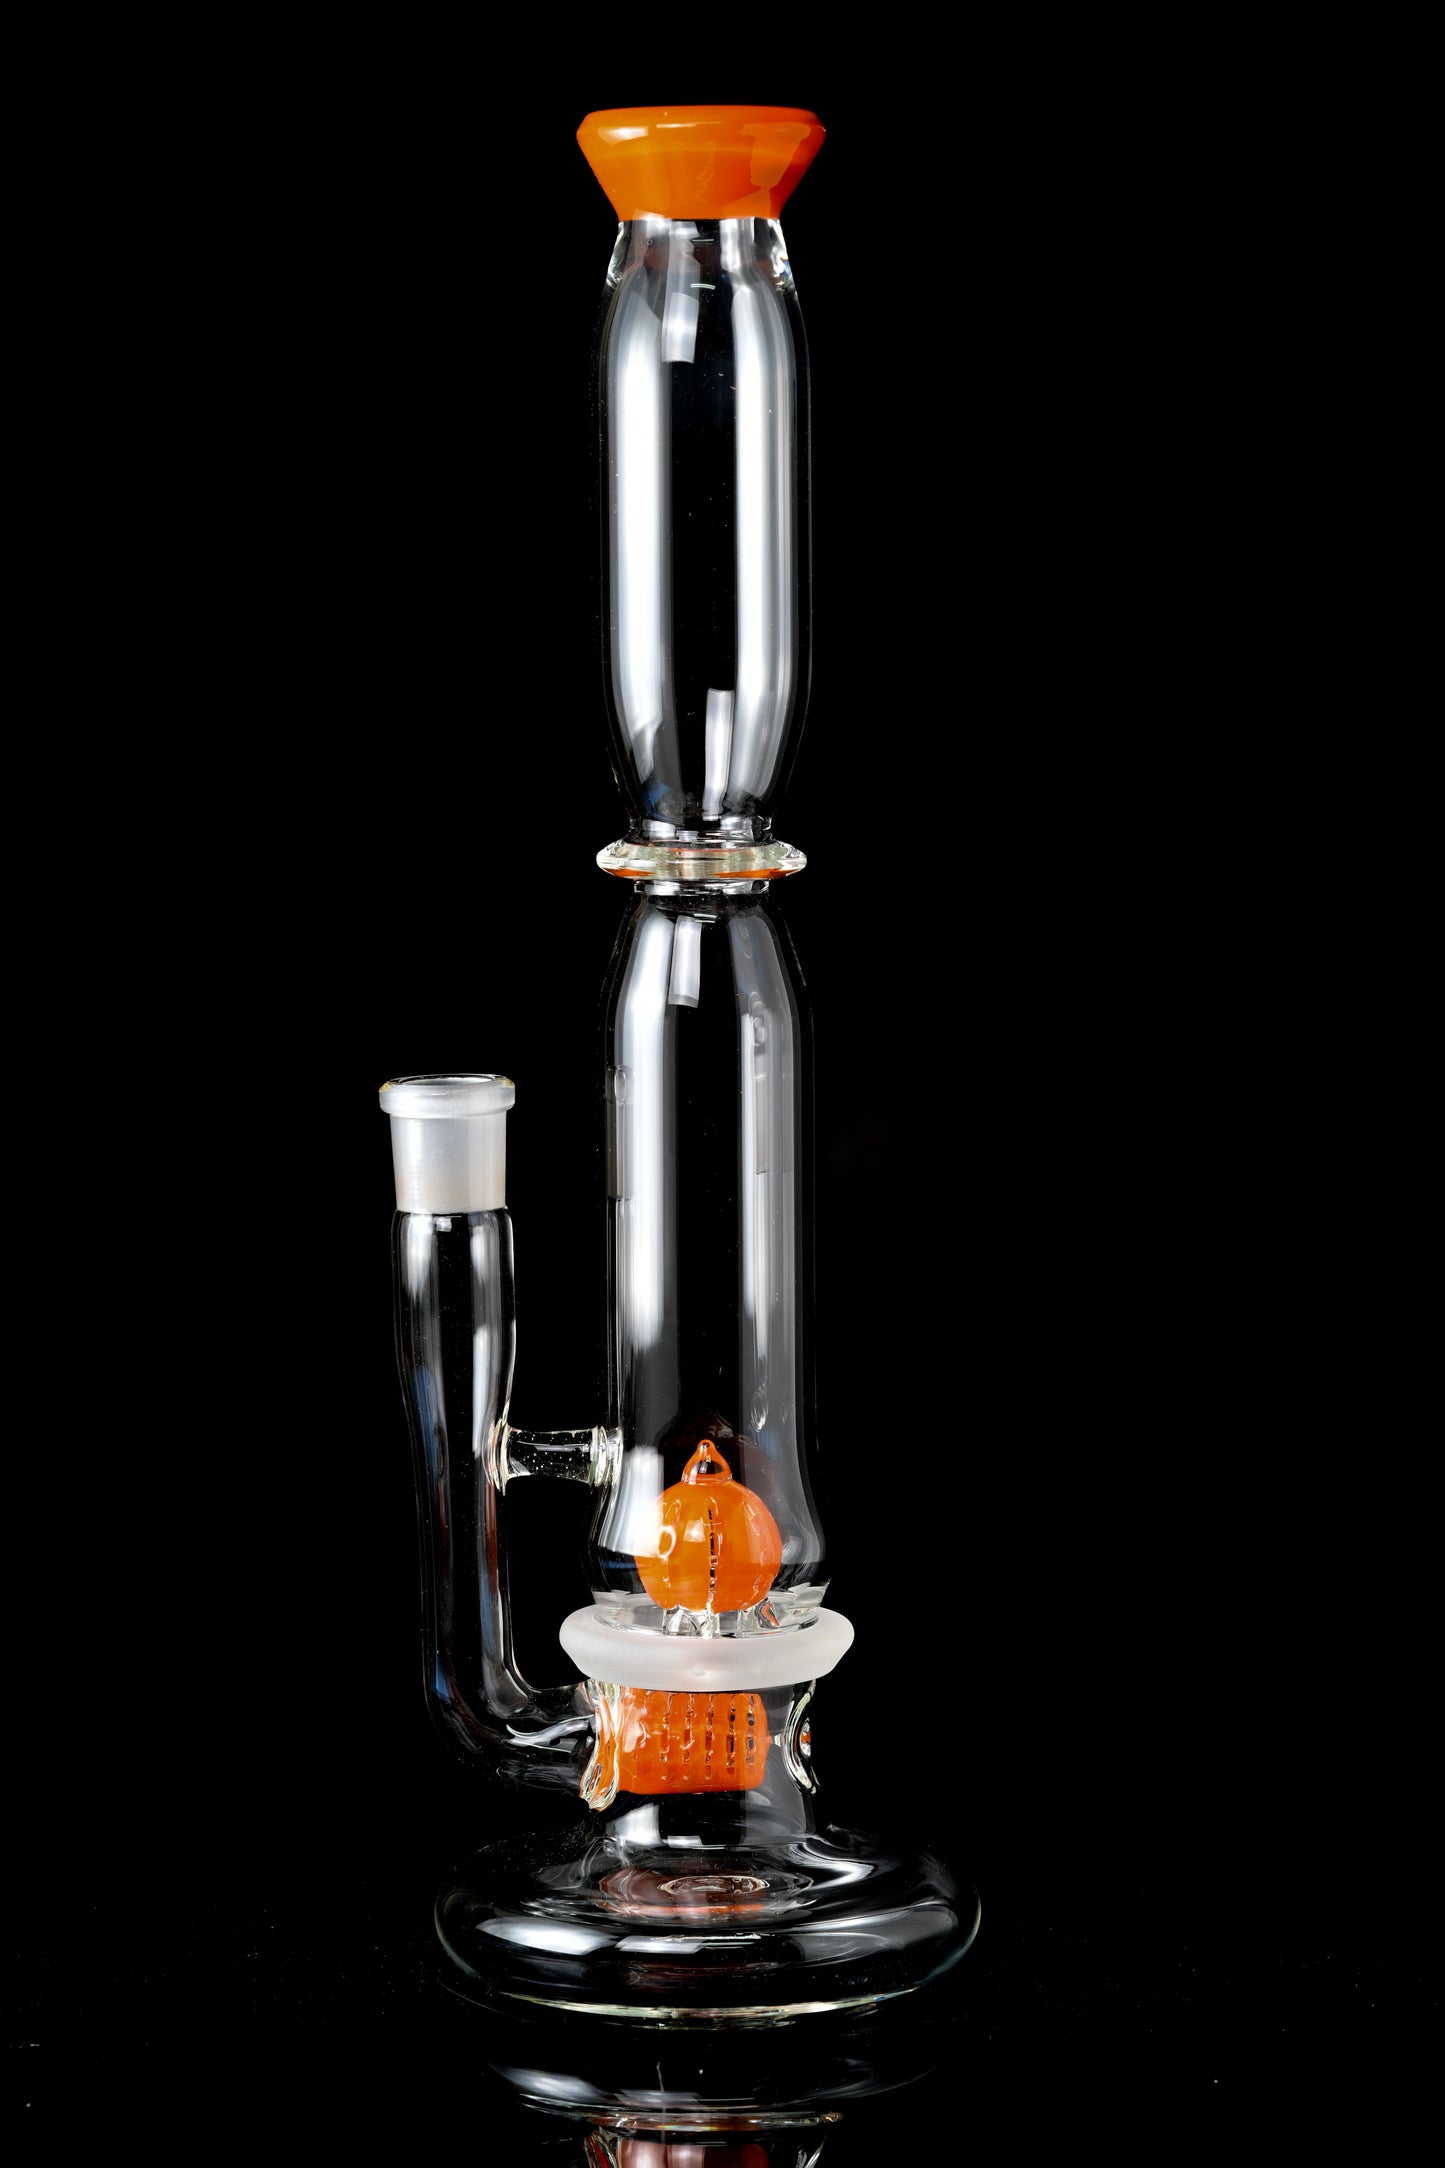 Titz Glass - Full Accent Gridded Stemline to Ball Perc